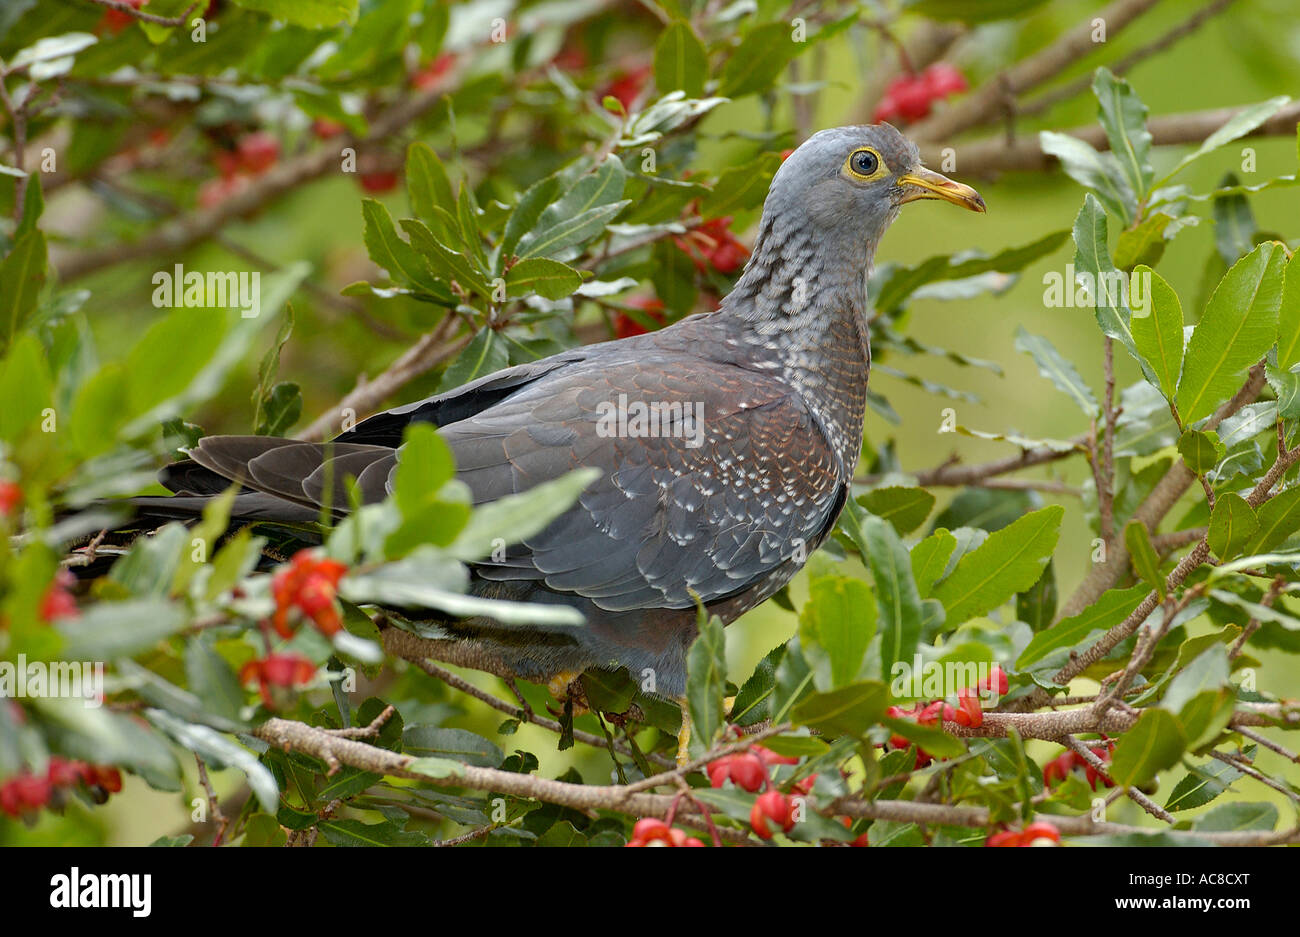 African Olive-Pigeon (rameron pigeon) in a leafy tree with red flowers Kirstenbosch - National Botanical Garden, South Africa Stock Photo